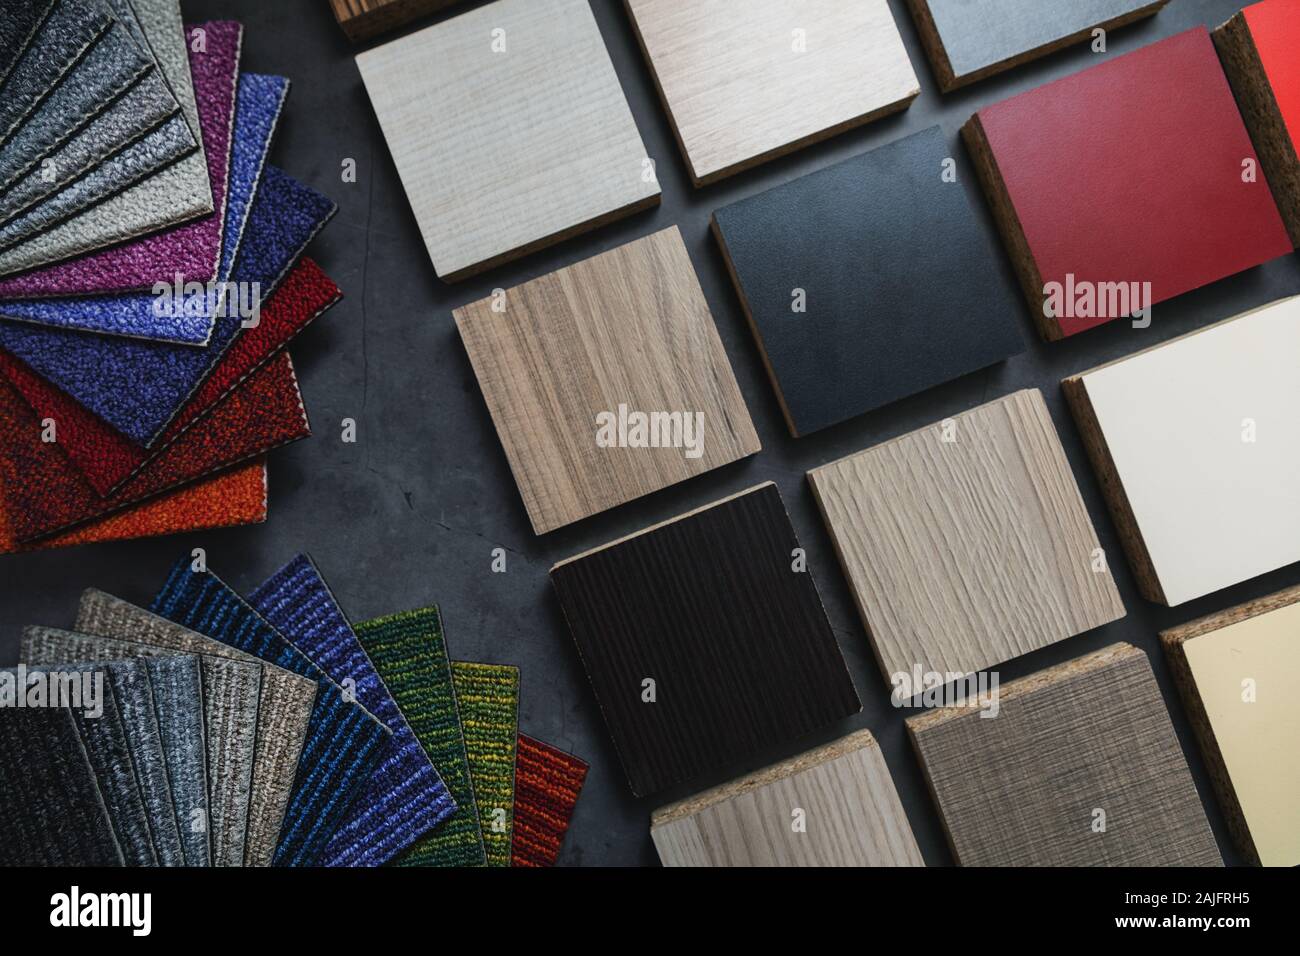 flooring and laminate furniture material samples for interior design project Stock Photo